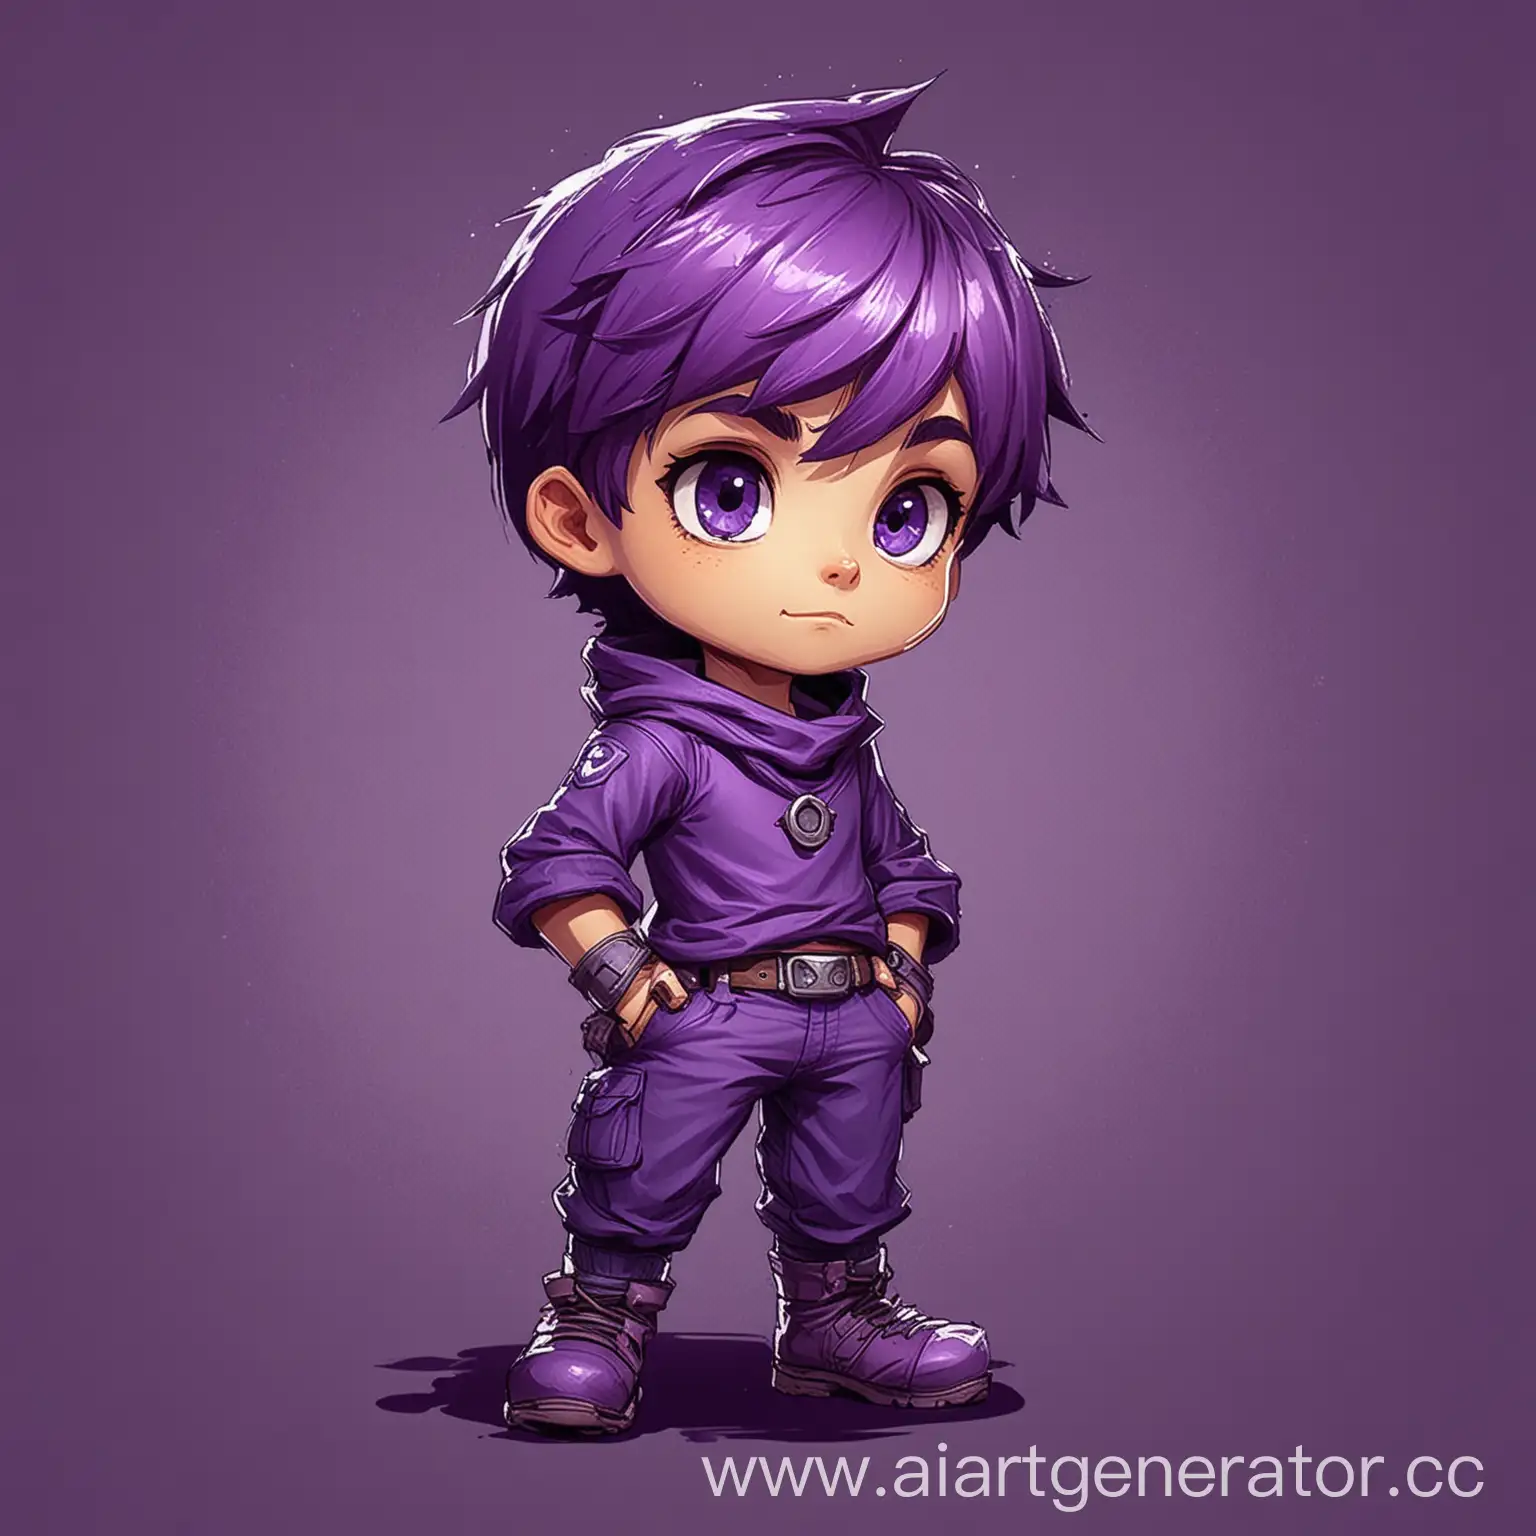 Boy-Game-Character-on-Purple-Background